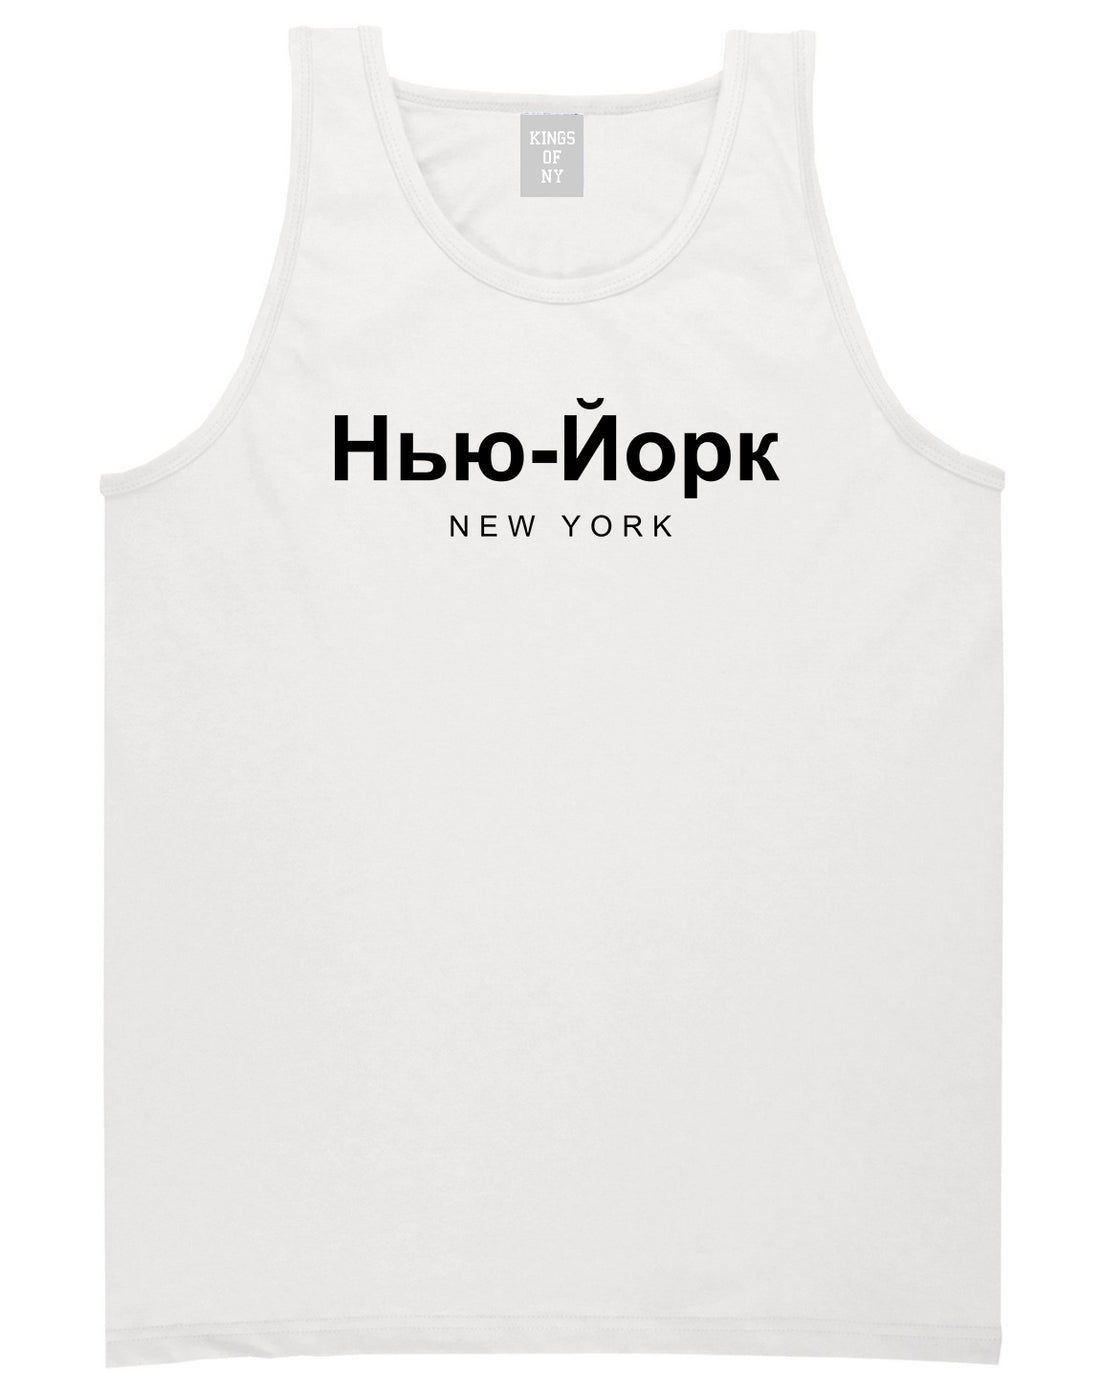 New York In Russian Mens Tank Top Shirt White by Kings Of NY